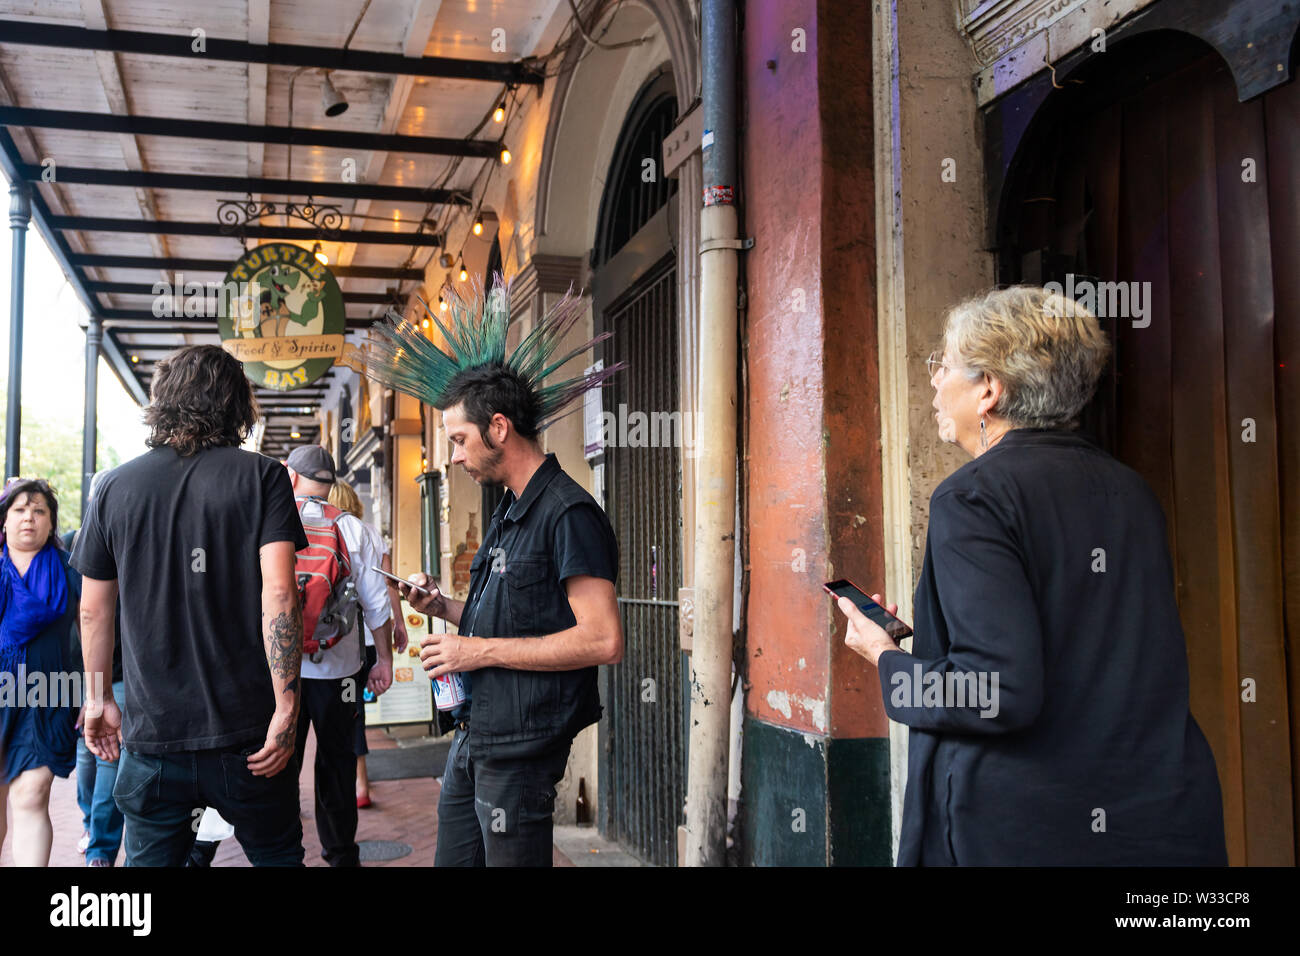 New Orleans, USA - April 22, 2018: People walking on Decatur street sidewalk in French quarter by restaurants and Turtle bay food and spirits bar in e Stock Photo